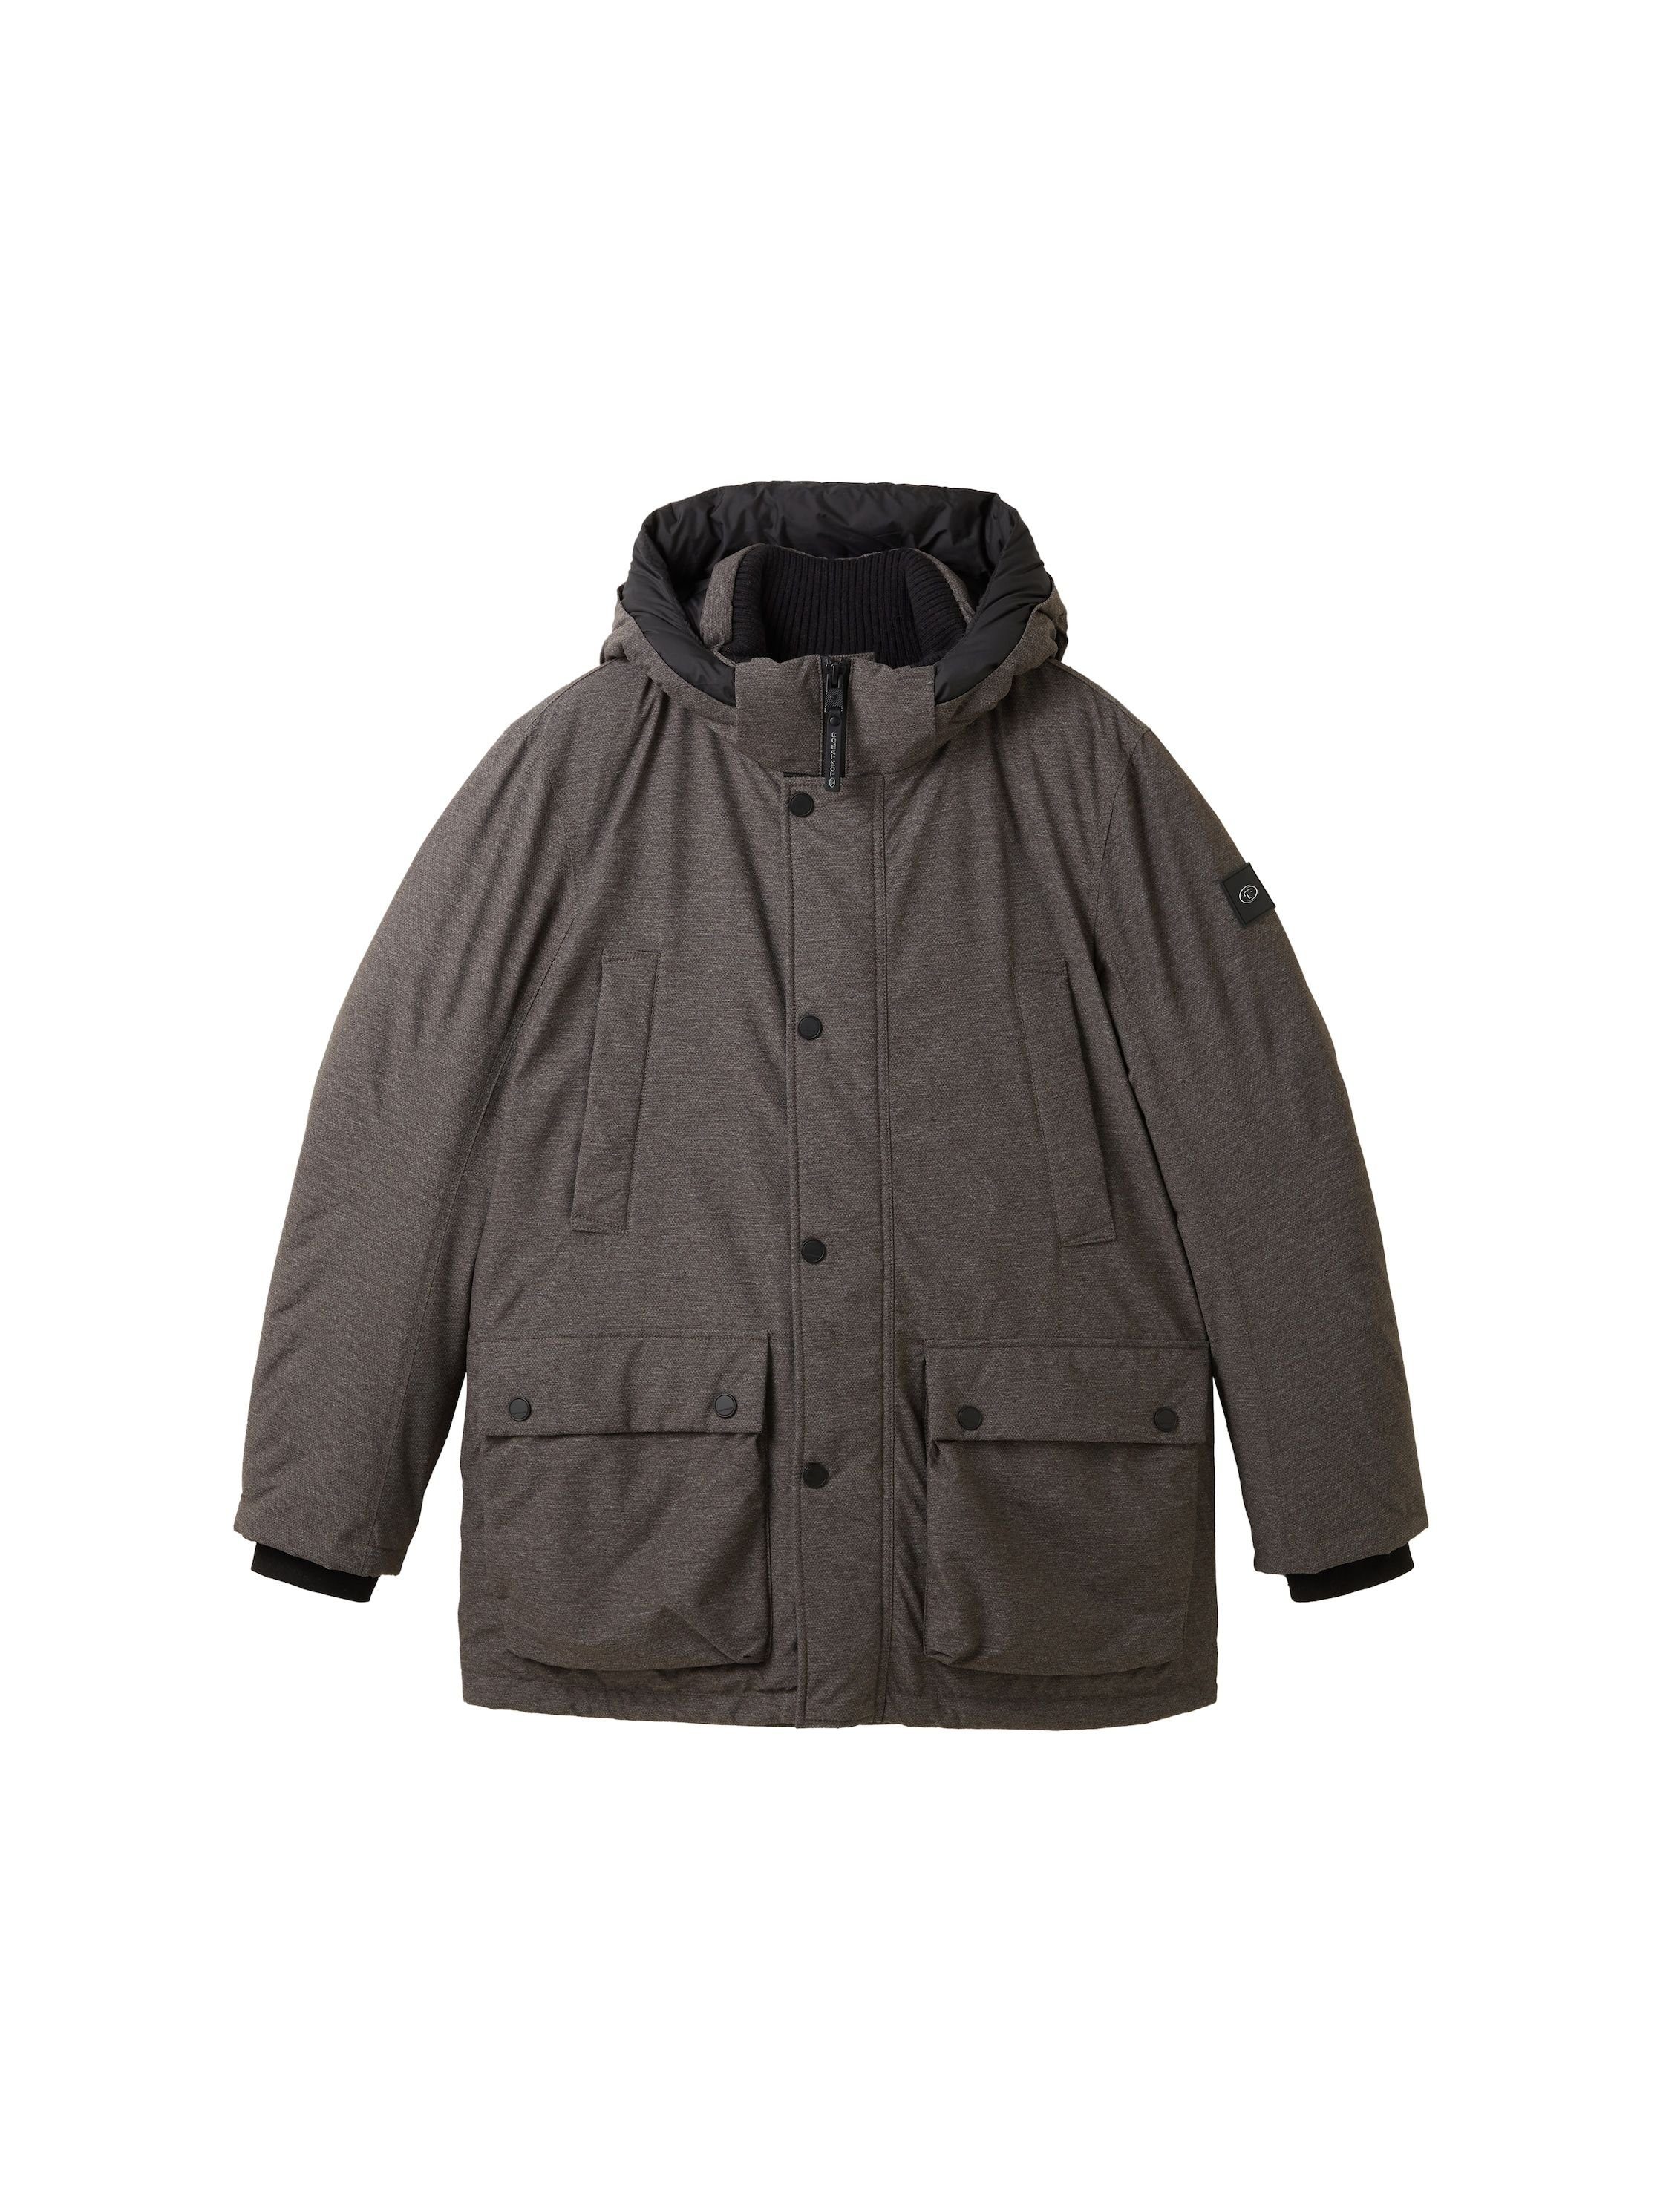 TOM TAILOR Outdoorjacke grey structure puffer